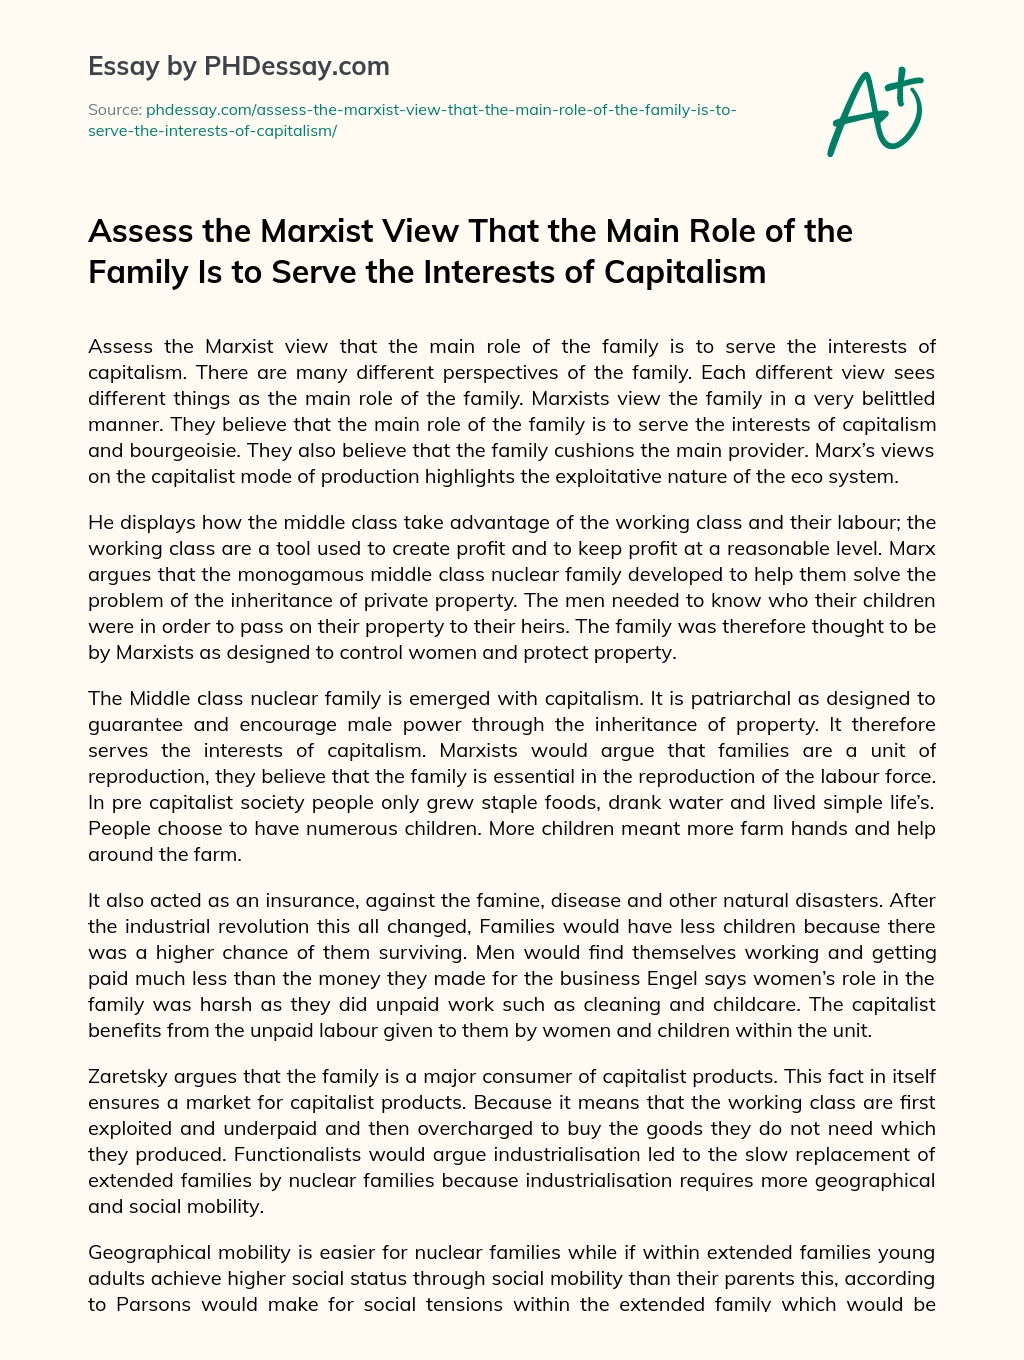 Assess the Marxist View That the Main Role of the Family Is to Serve the Interests of Capitalism essay